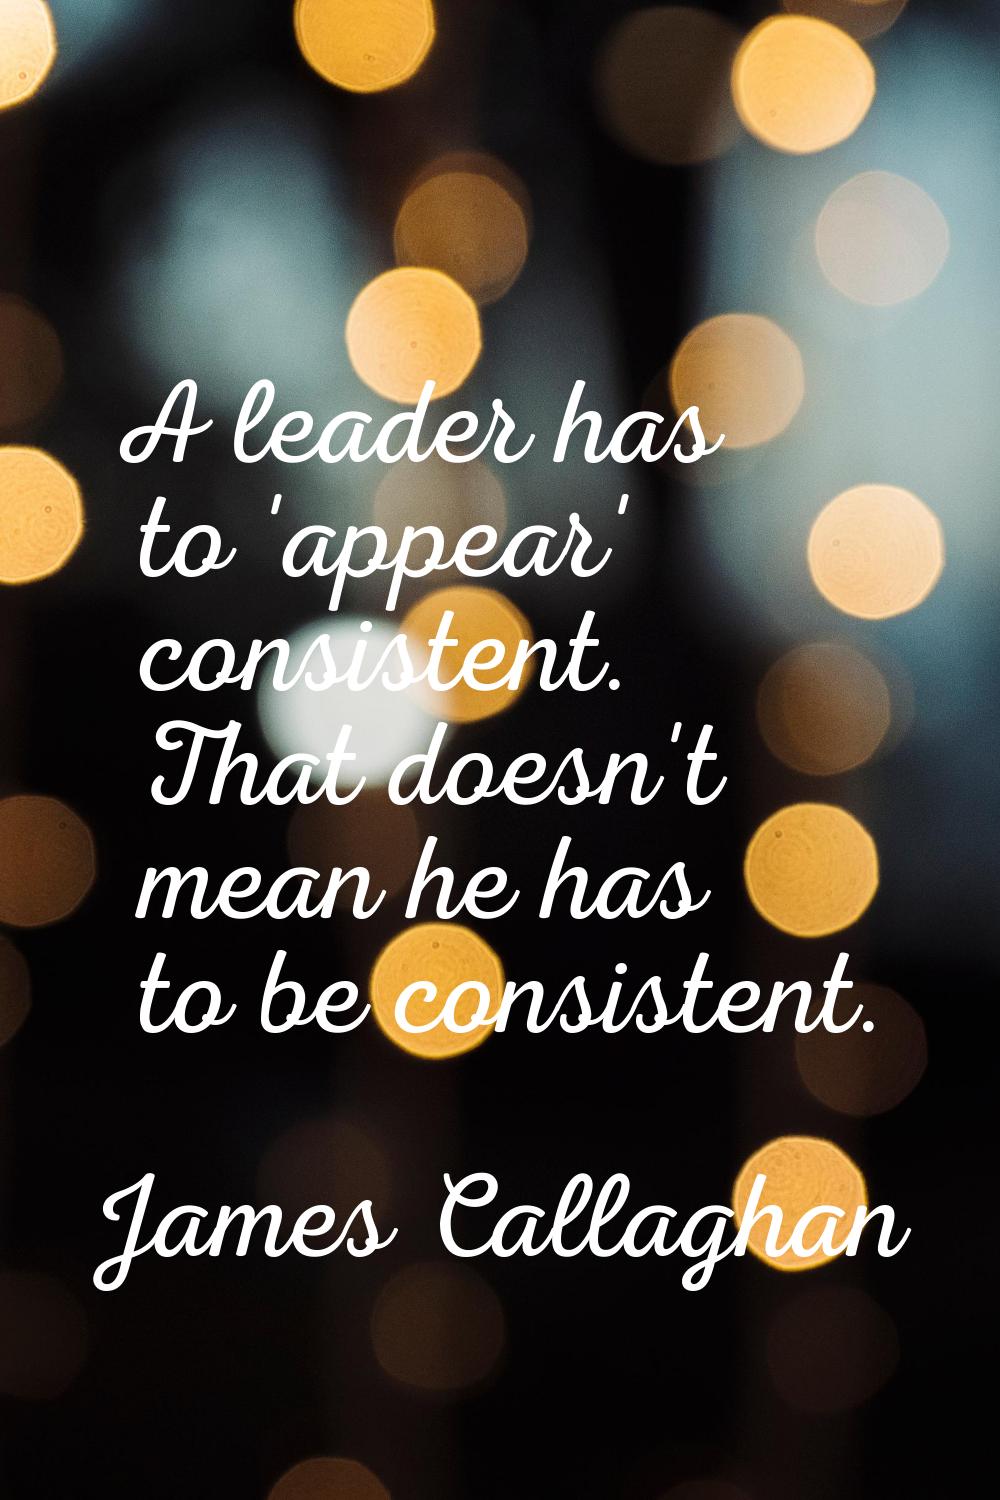 A leader has to 'appear' consistent. That doesn't mean he has to be consistent.